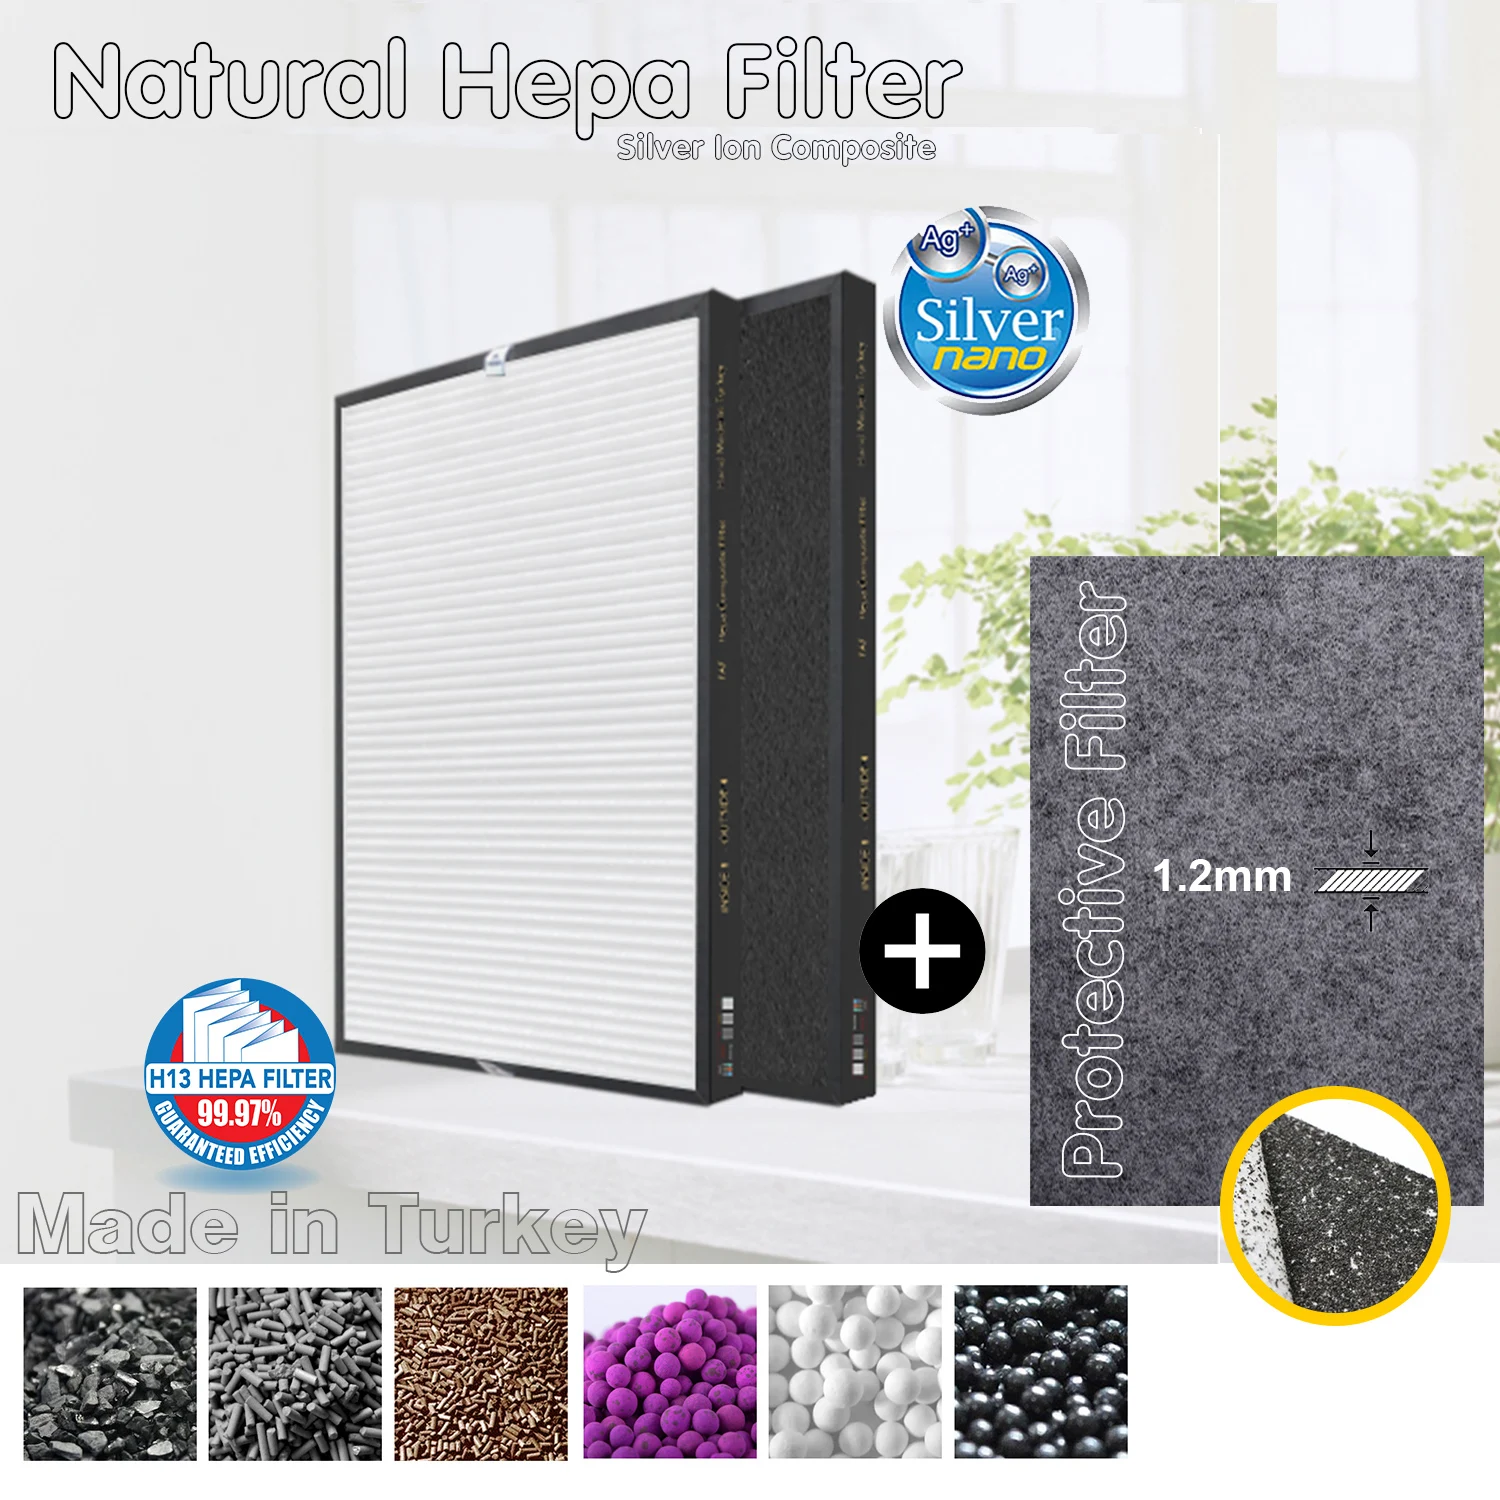 Buy 340*295*40mm Custom Production HEPA + Active Carbon Composite Multifunctional Filter Air Purifier and Protector on